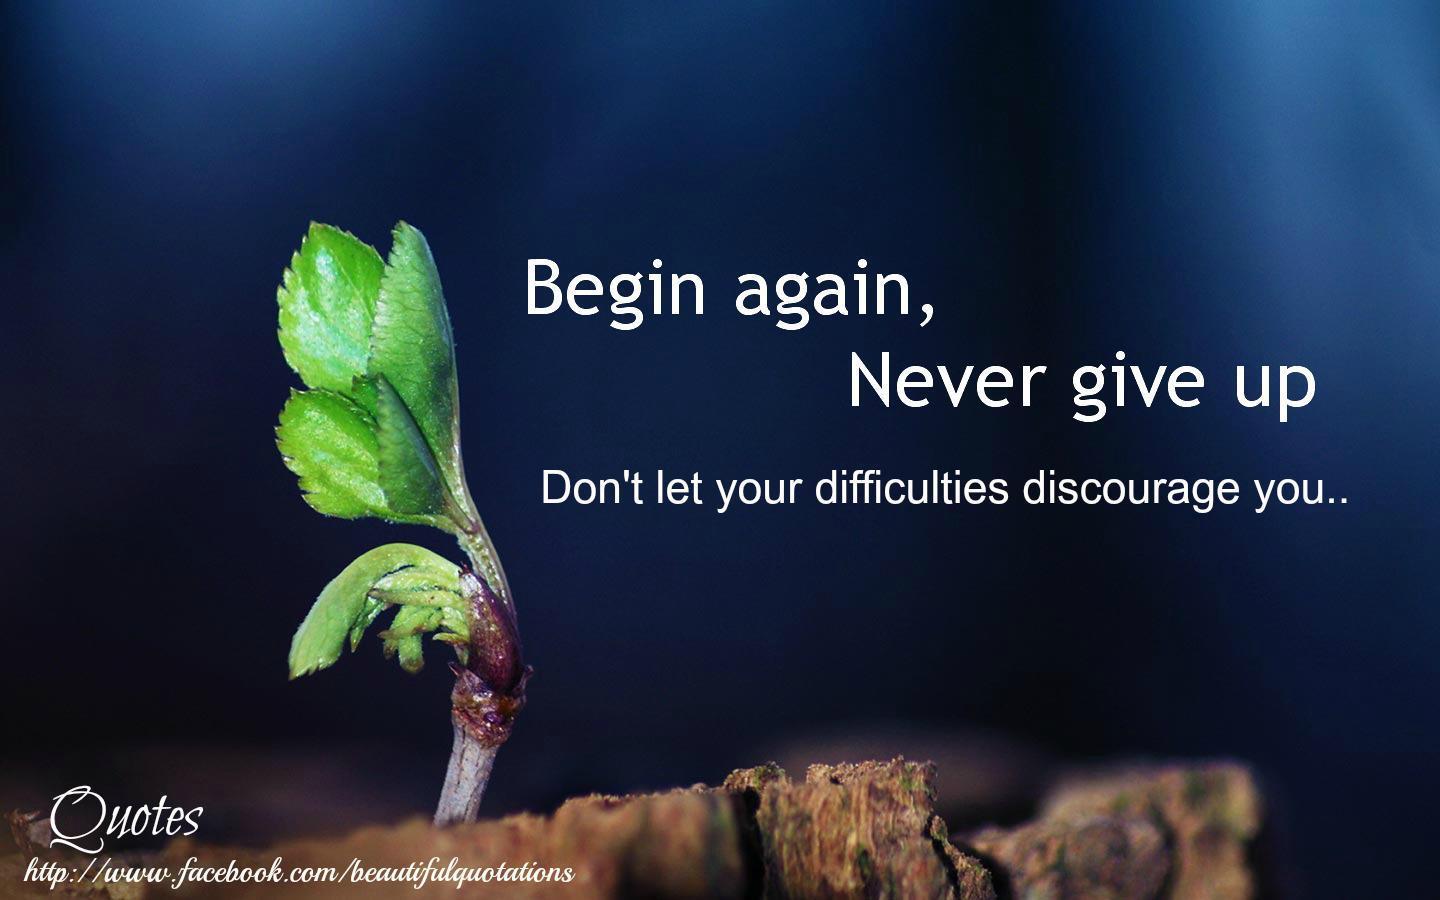 Never Give Up Motivational Wallpaper: Begin again, Never give up